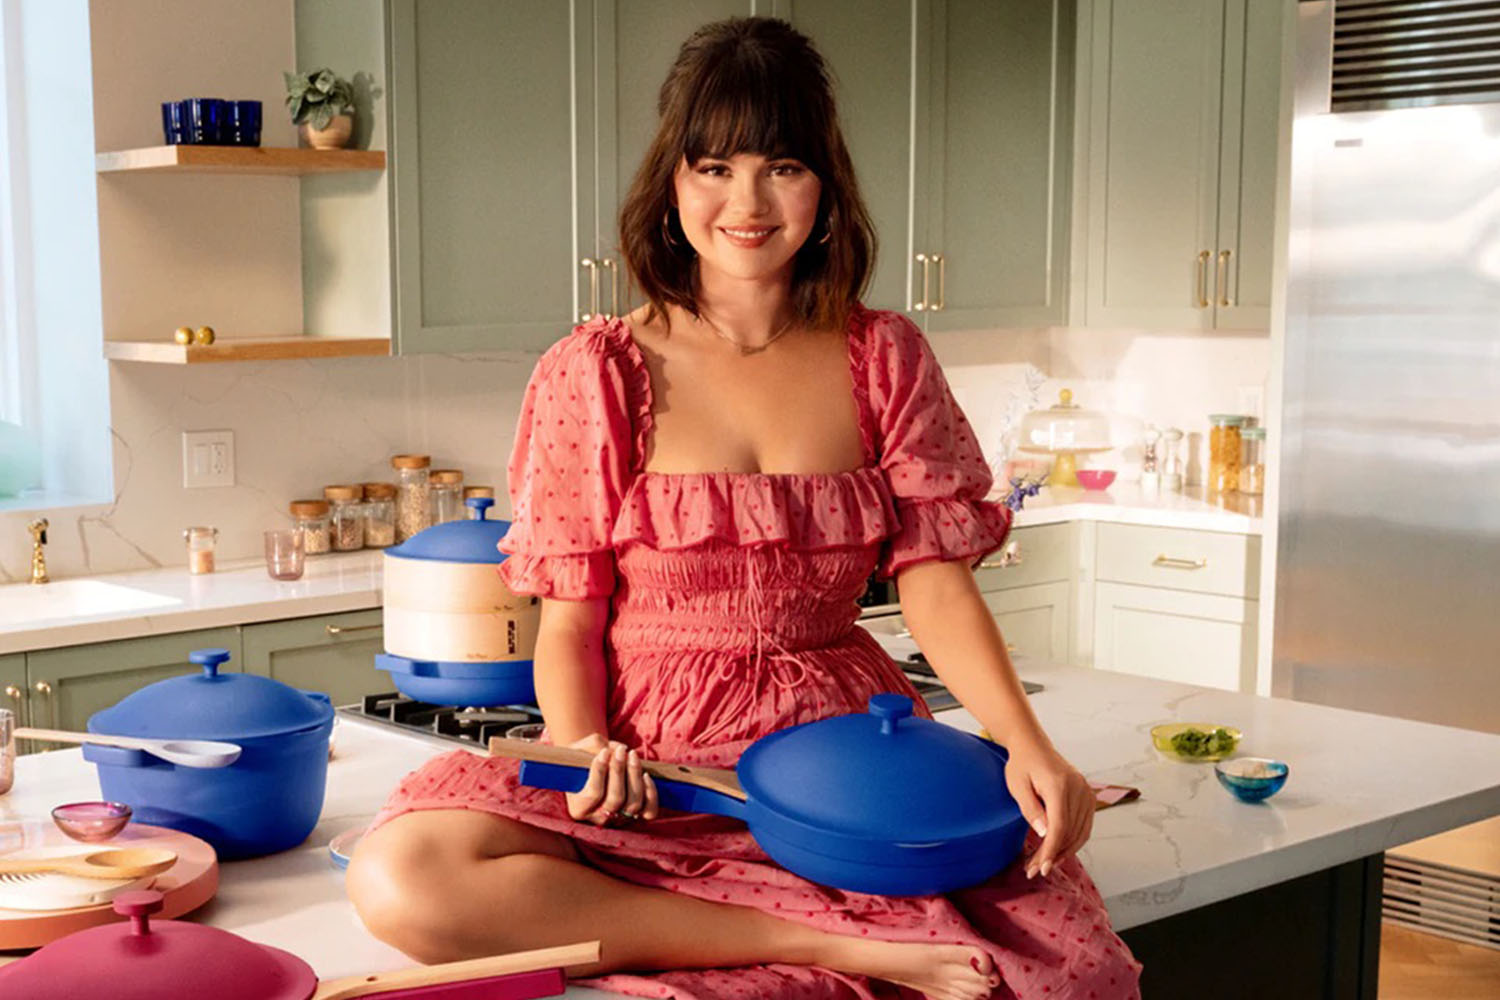 A campaign shot of Selena Gomez in a kitchen holding a blue Always Pan from Our Place